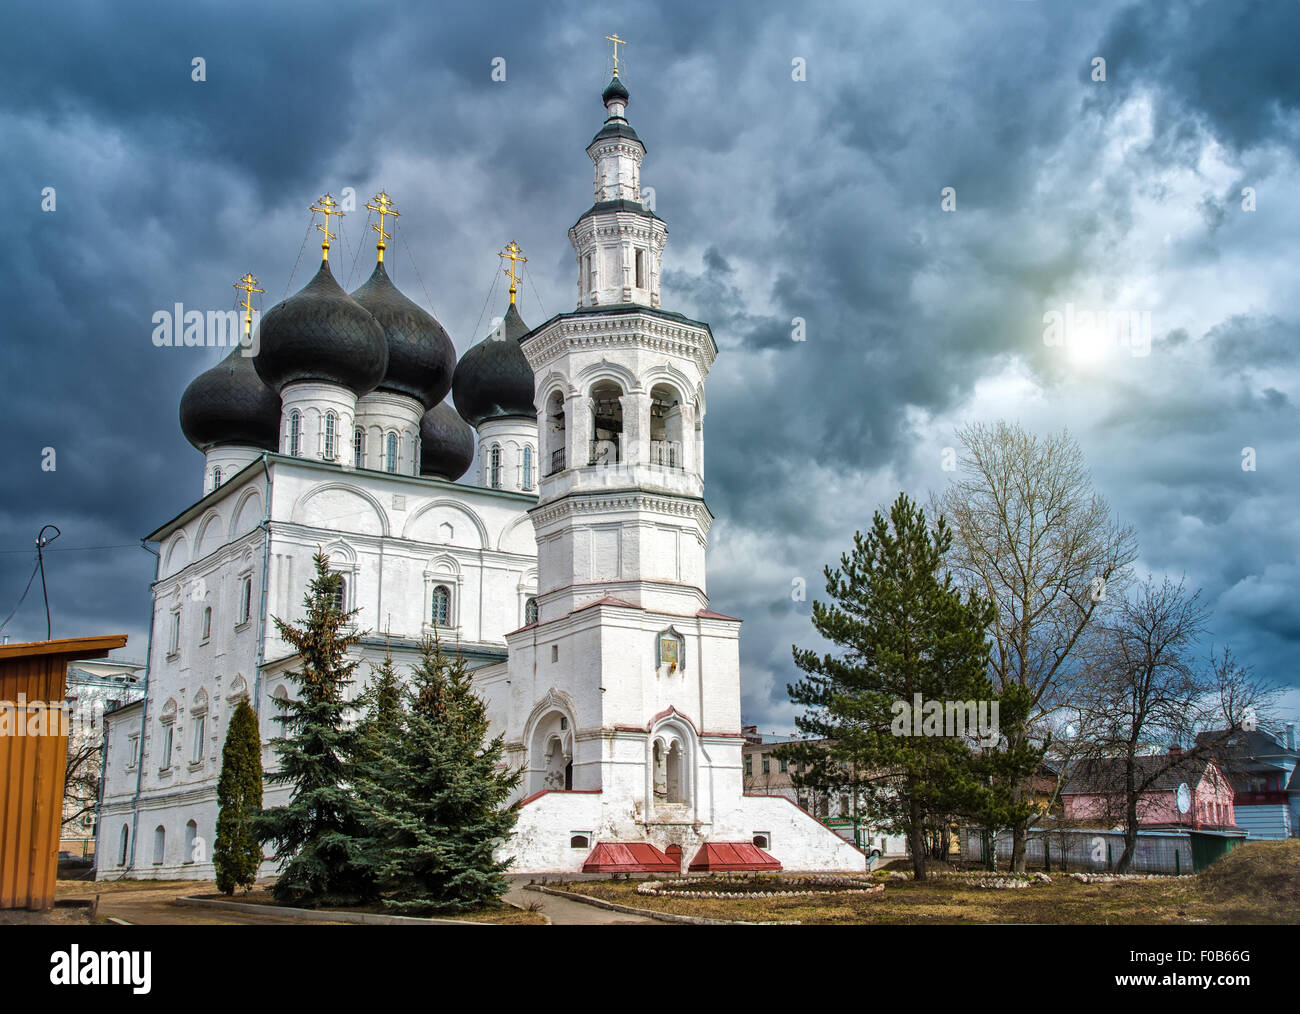 Church of St. Nicholas in the city of Vologda. Russia Stock Photo